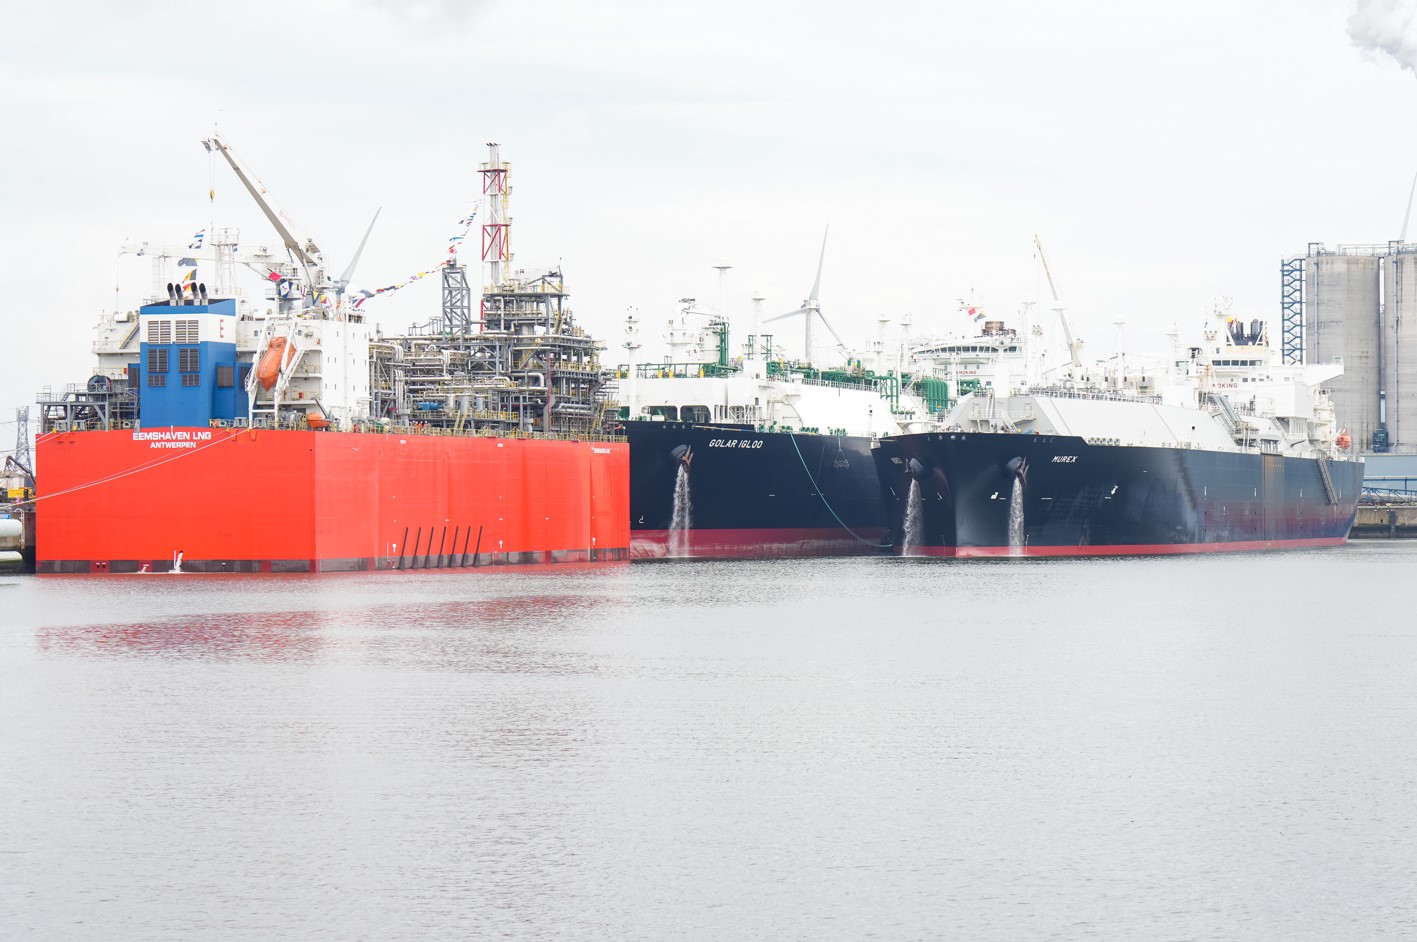 Gasunie expects to resume Eemshaven LNG sendout next week